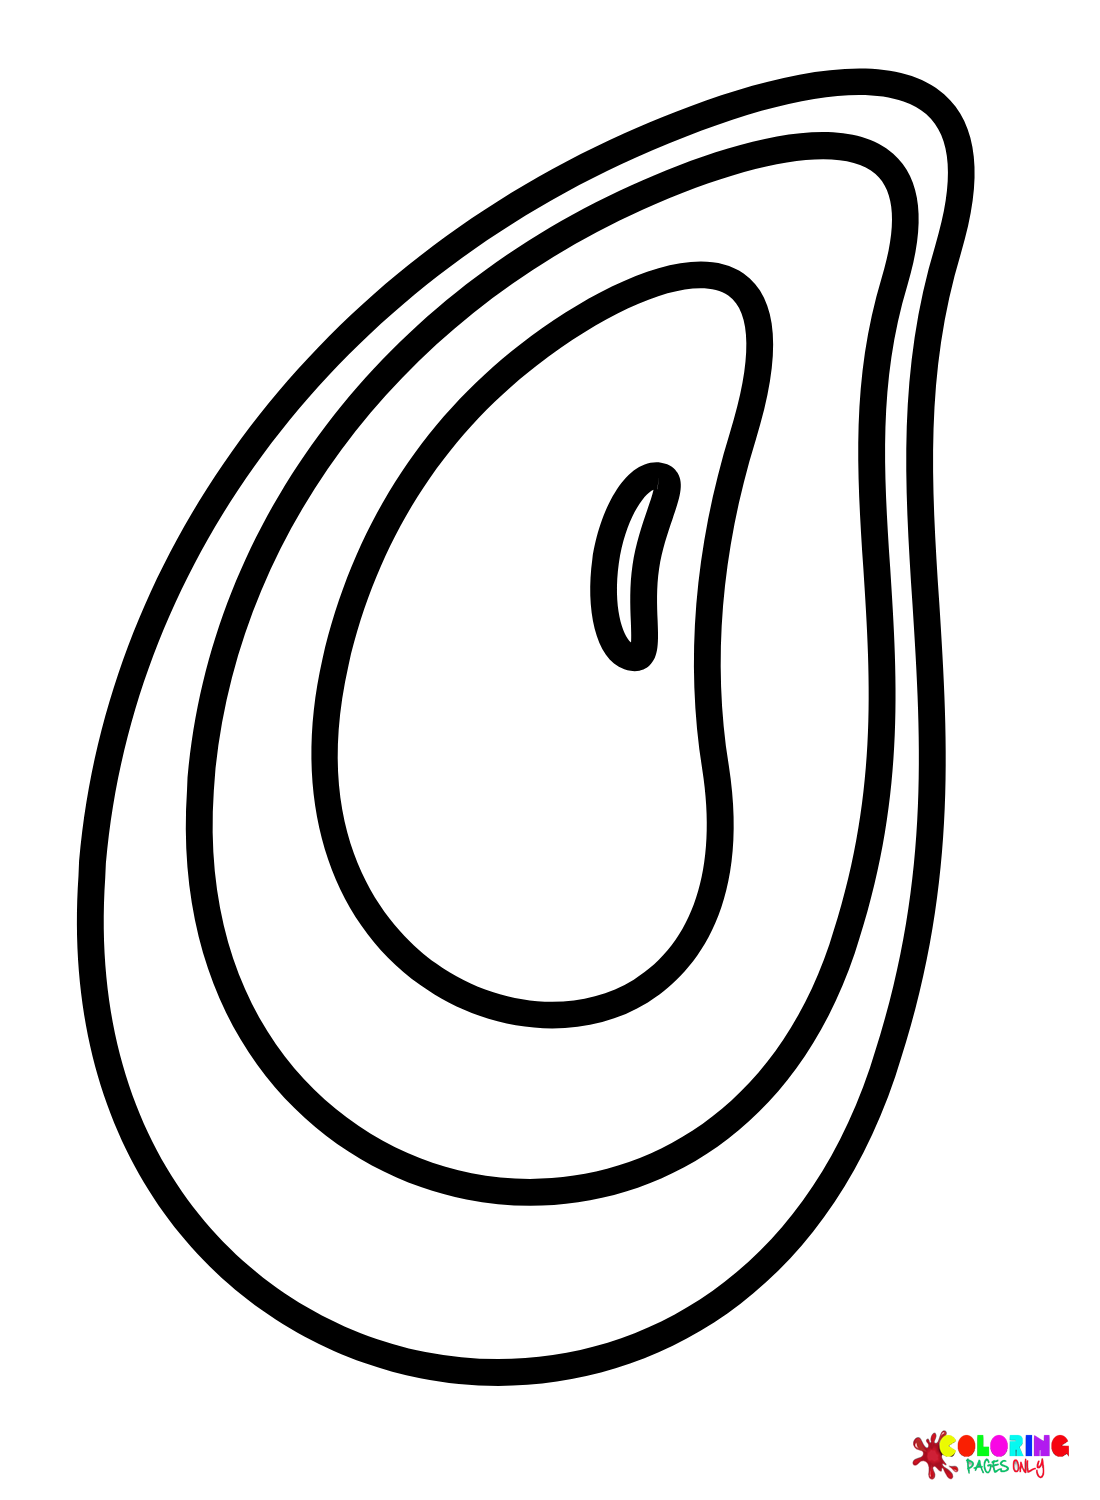 Black Mussels Coloring Page